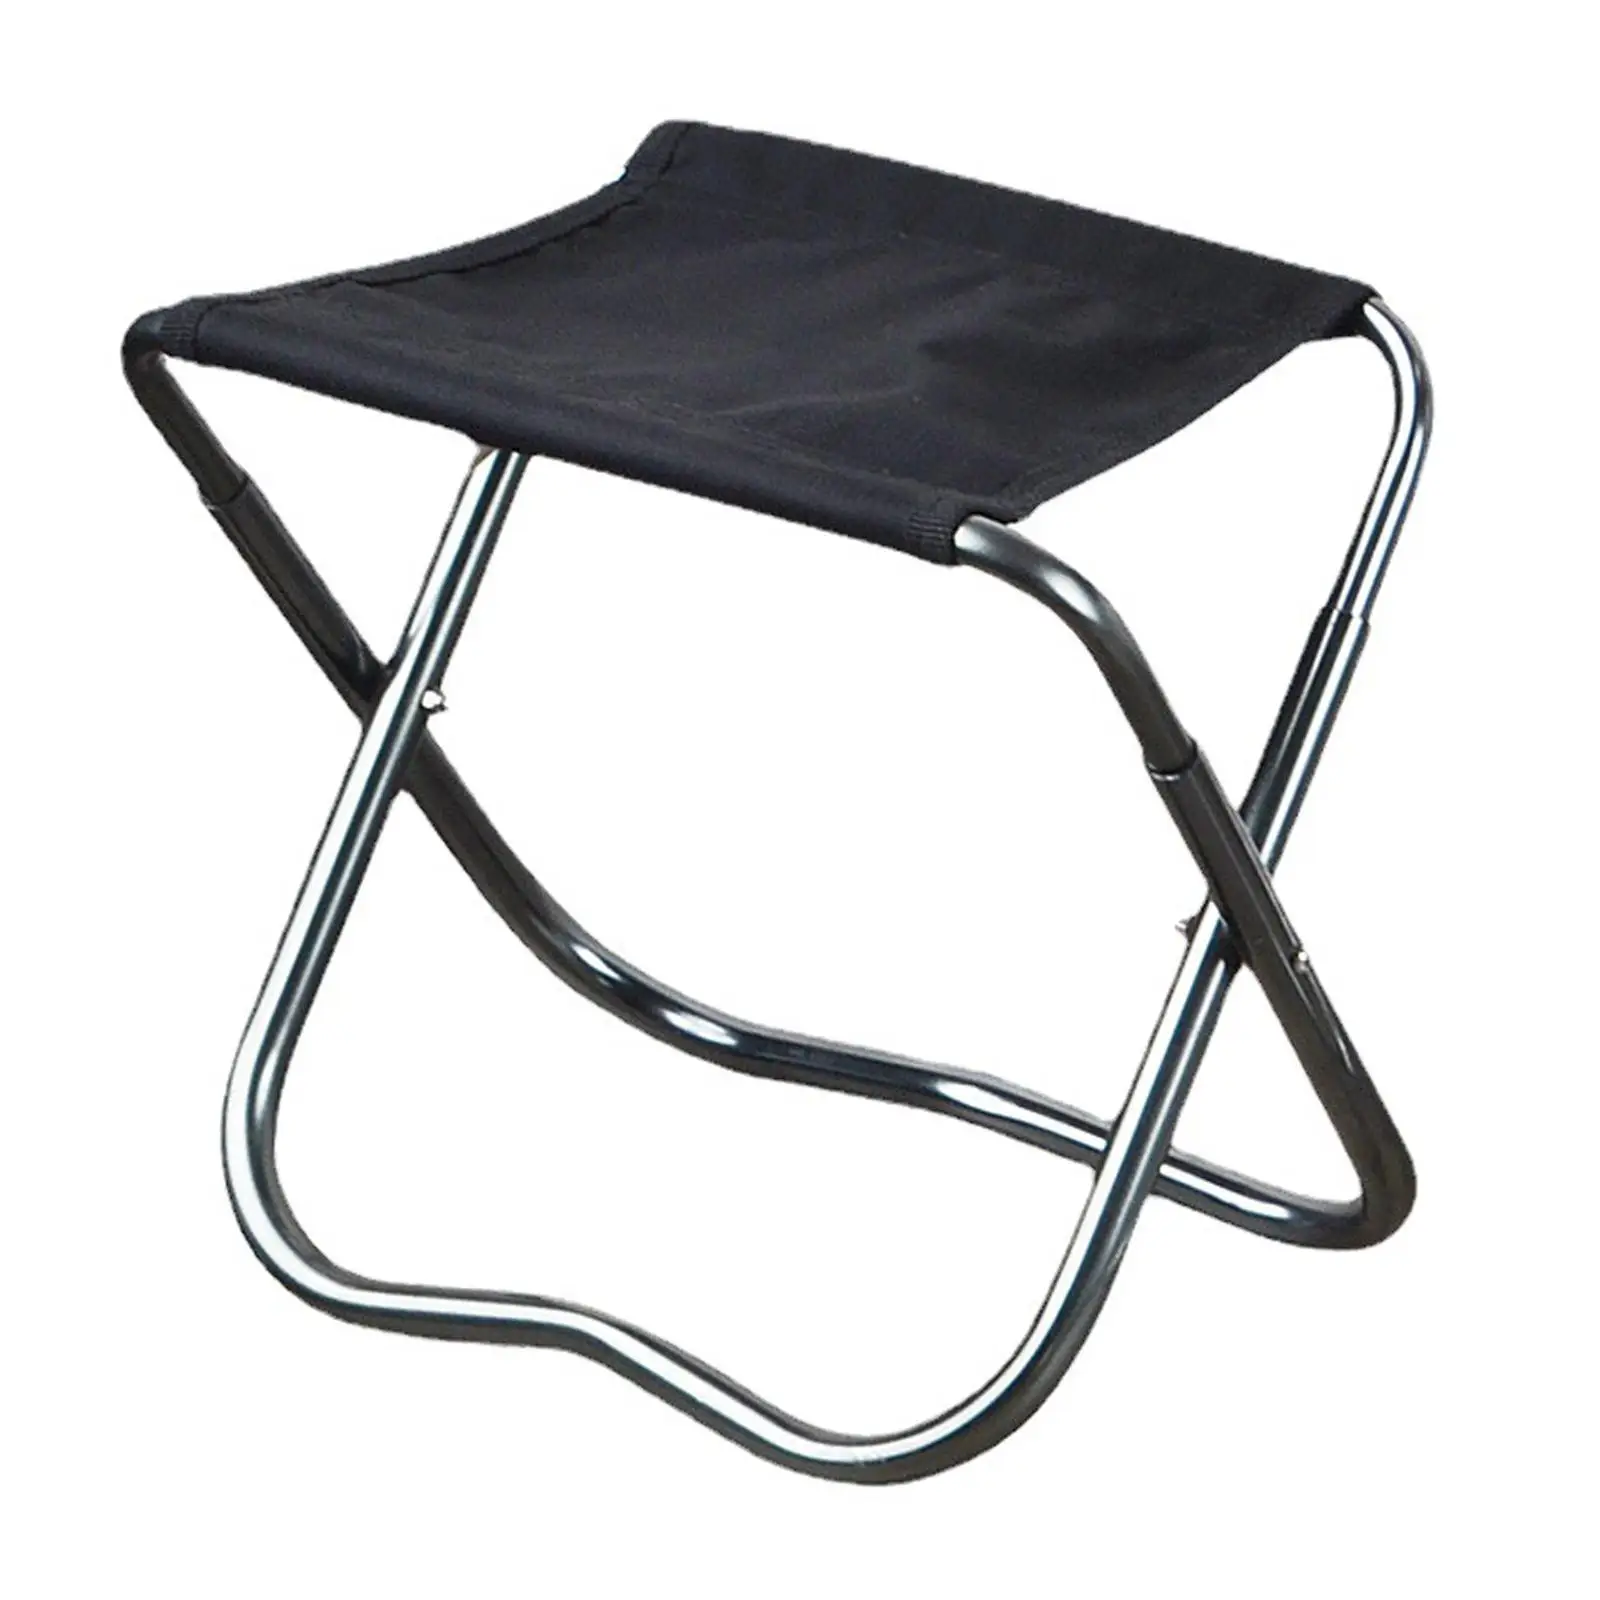 Camping Chair Comfortable Portable Folding Stool Outdoor Wear Resistant Camping Stool for Picnic Garden Hiking Fishing Camping